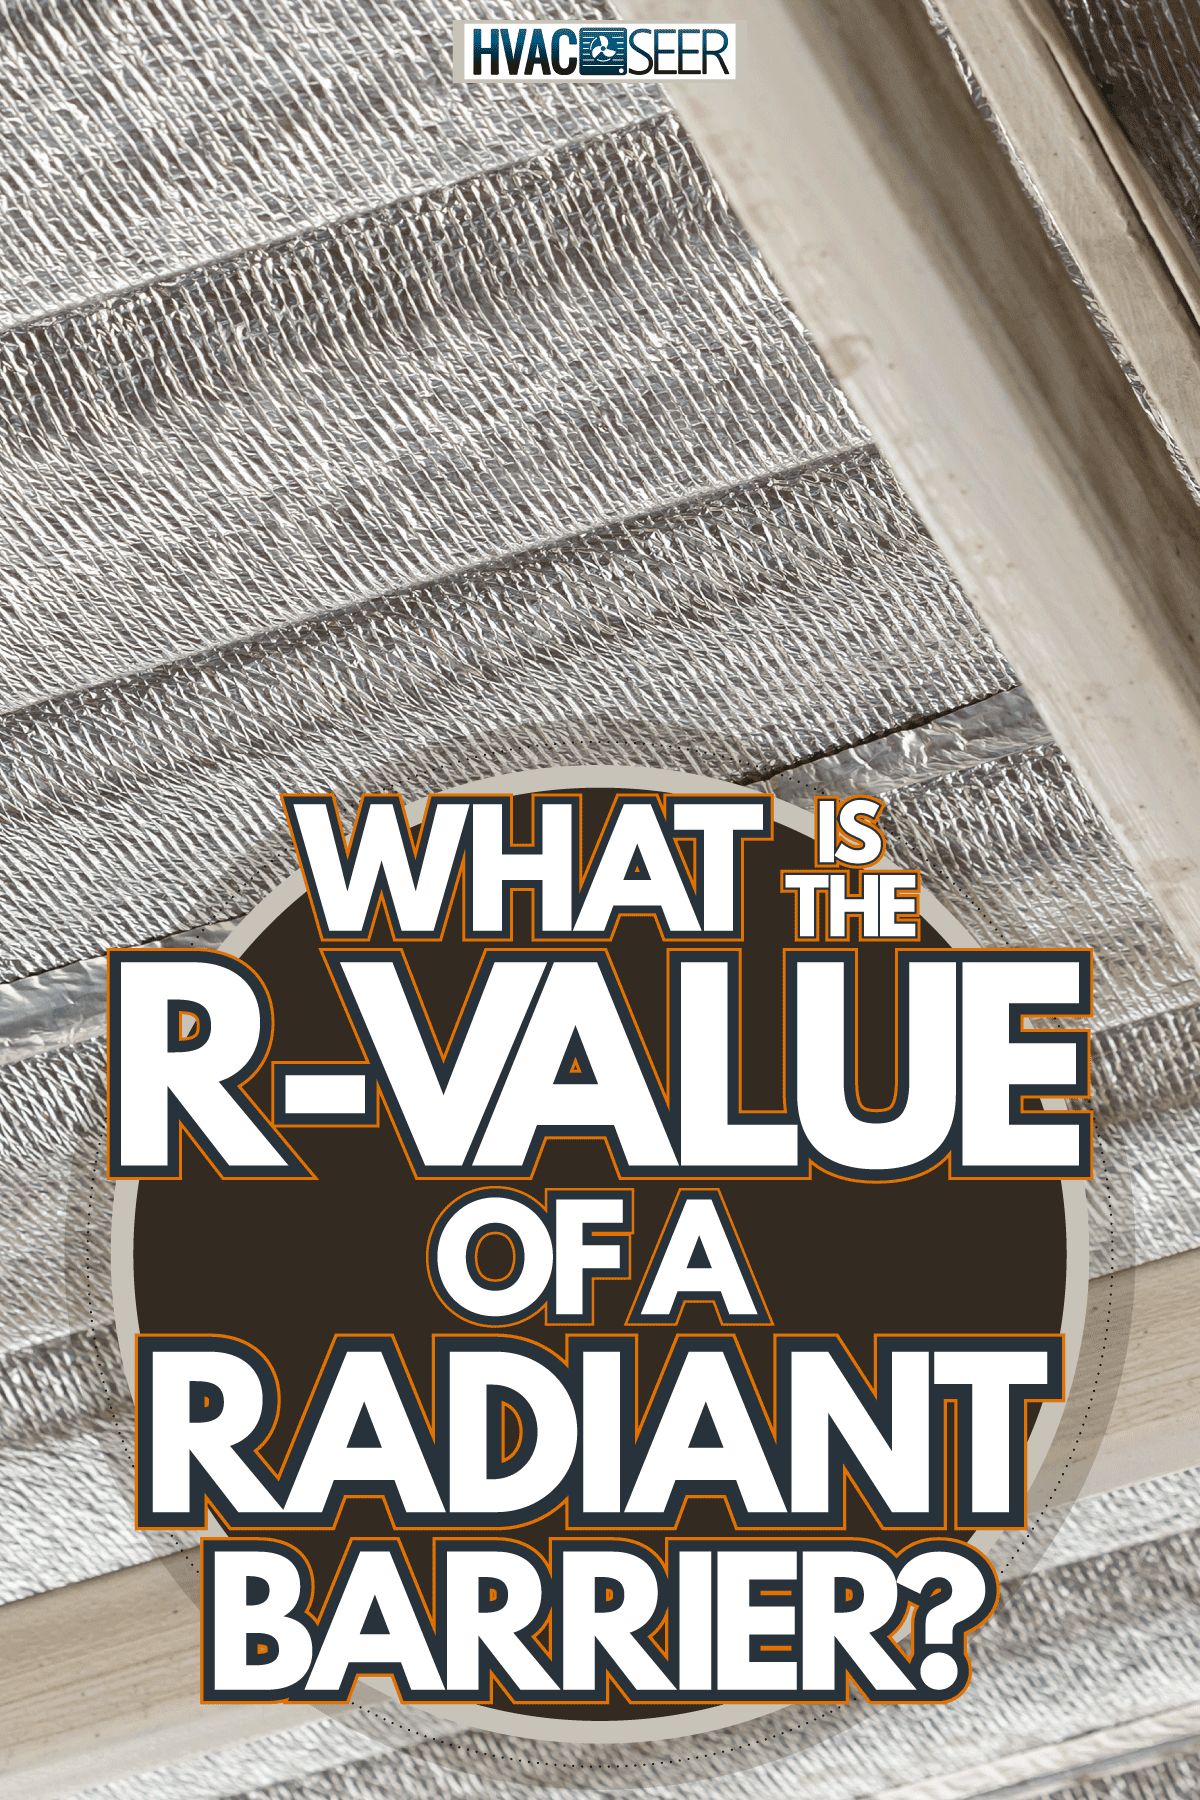 Radiant barrier on the roofing, What Is The R-Value Of A Radiant Barrier?